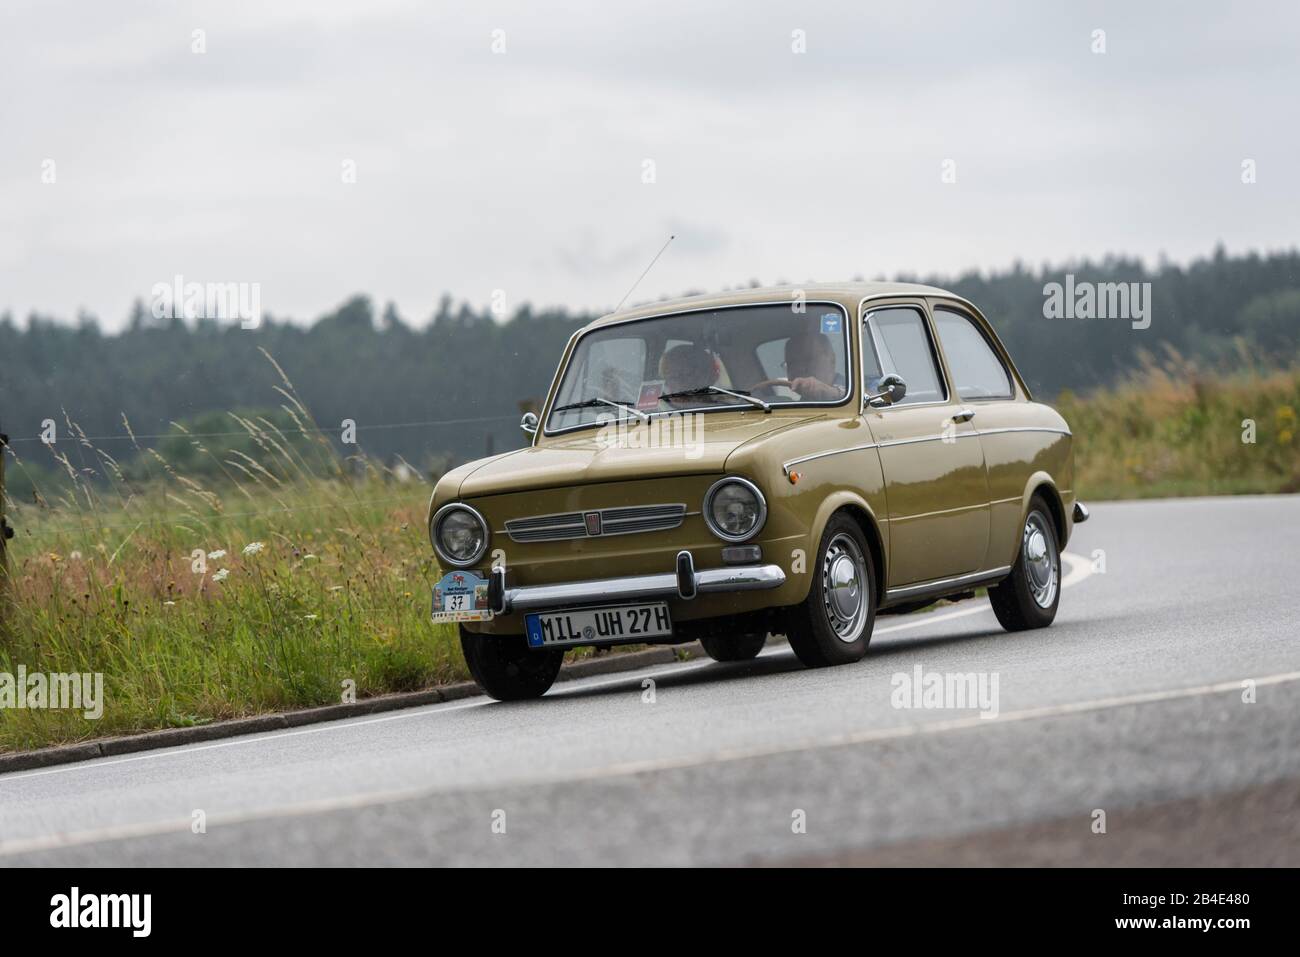 Bad König, Hesse, Germany, Fiat 850 Special, built in 1969, 843 cc displacement, 27 KW at the classic festival. Stock Photo